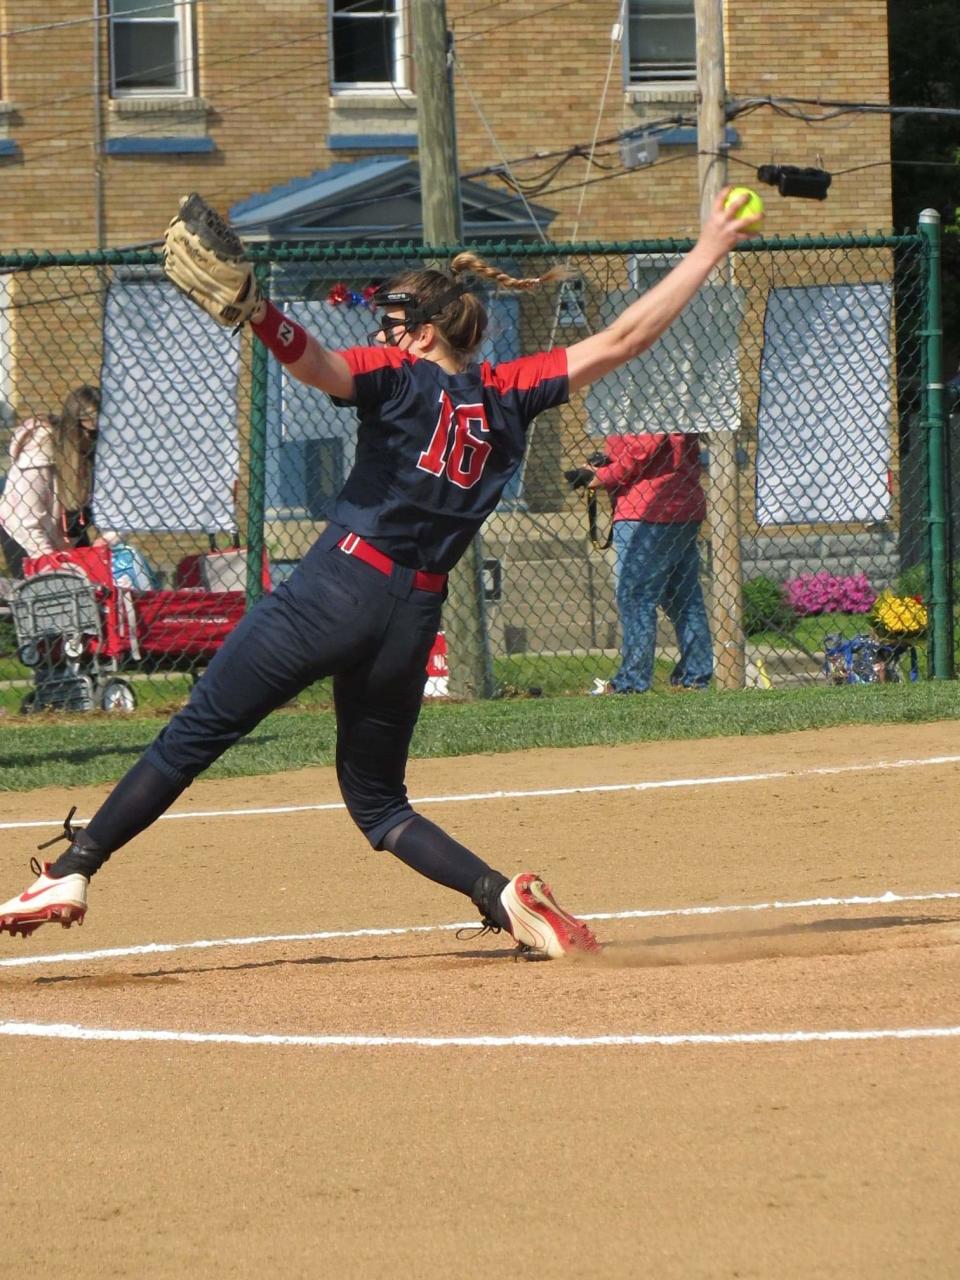 Norwood senior Hannah Green fired a no-hitter against Withrow April 27.